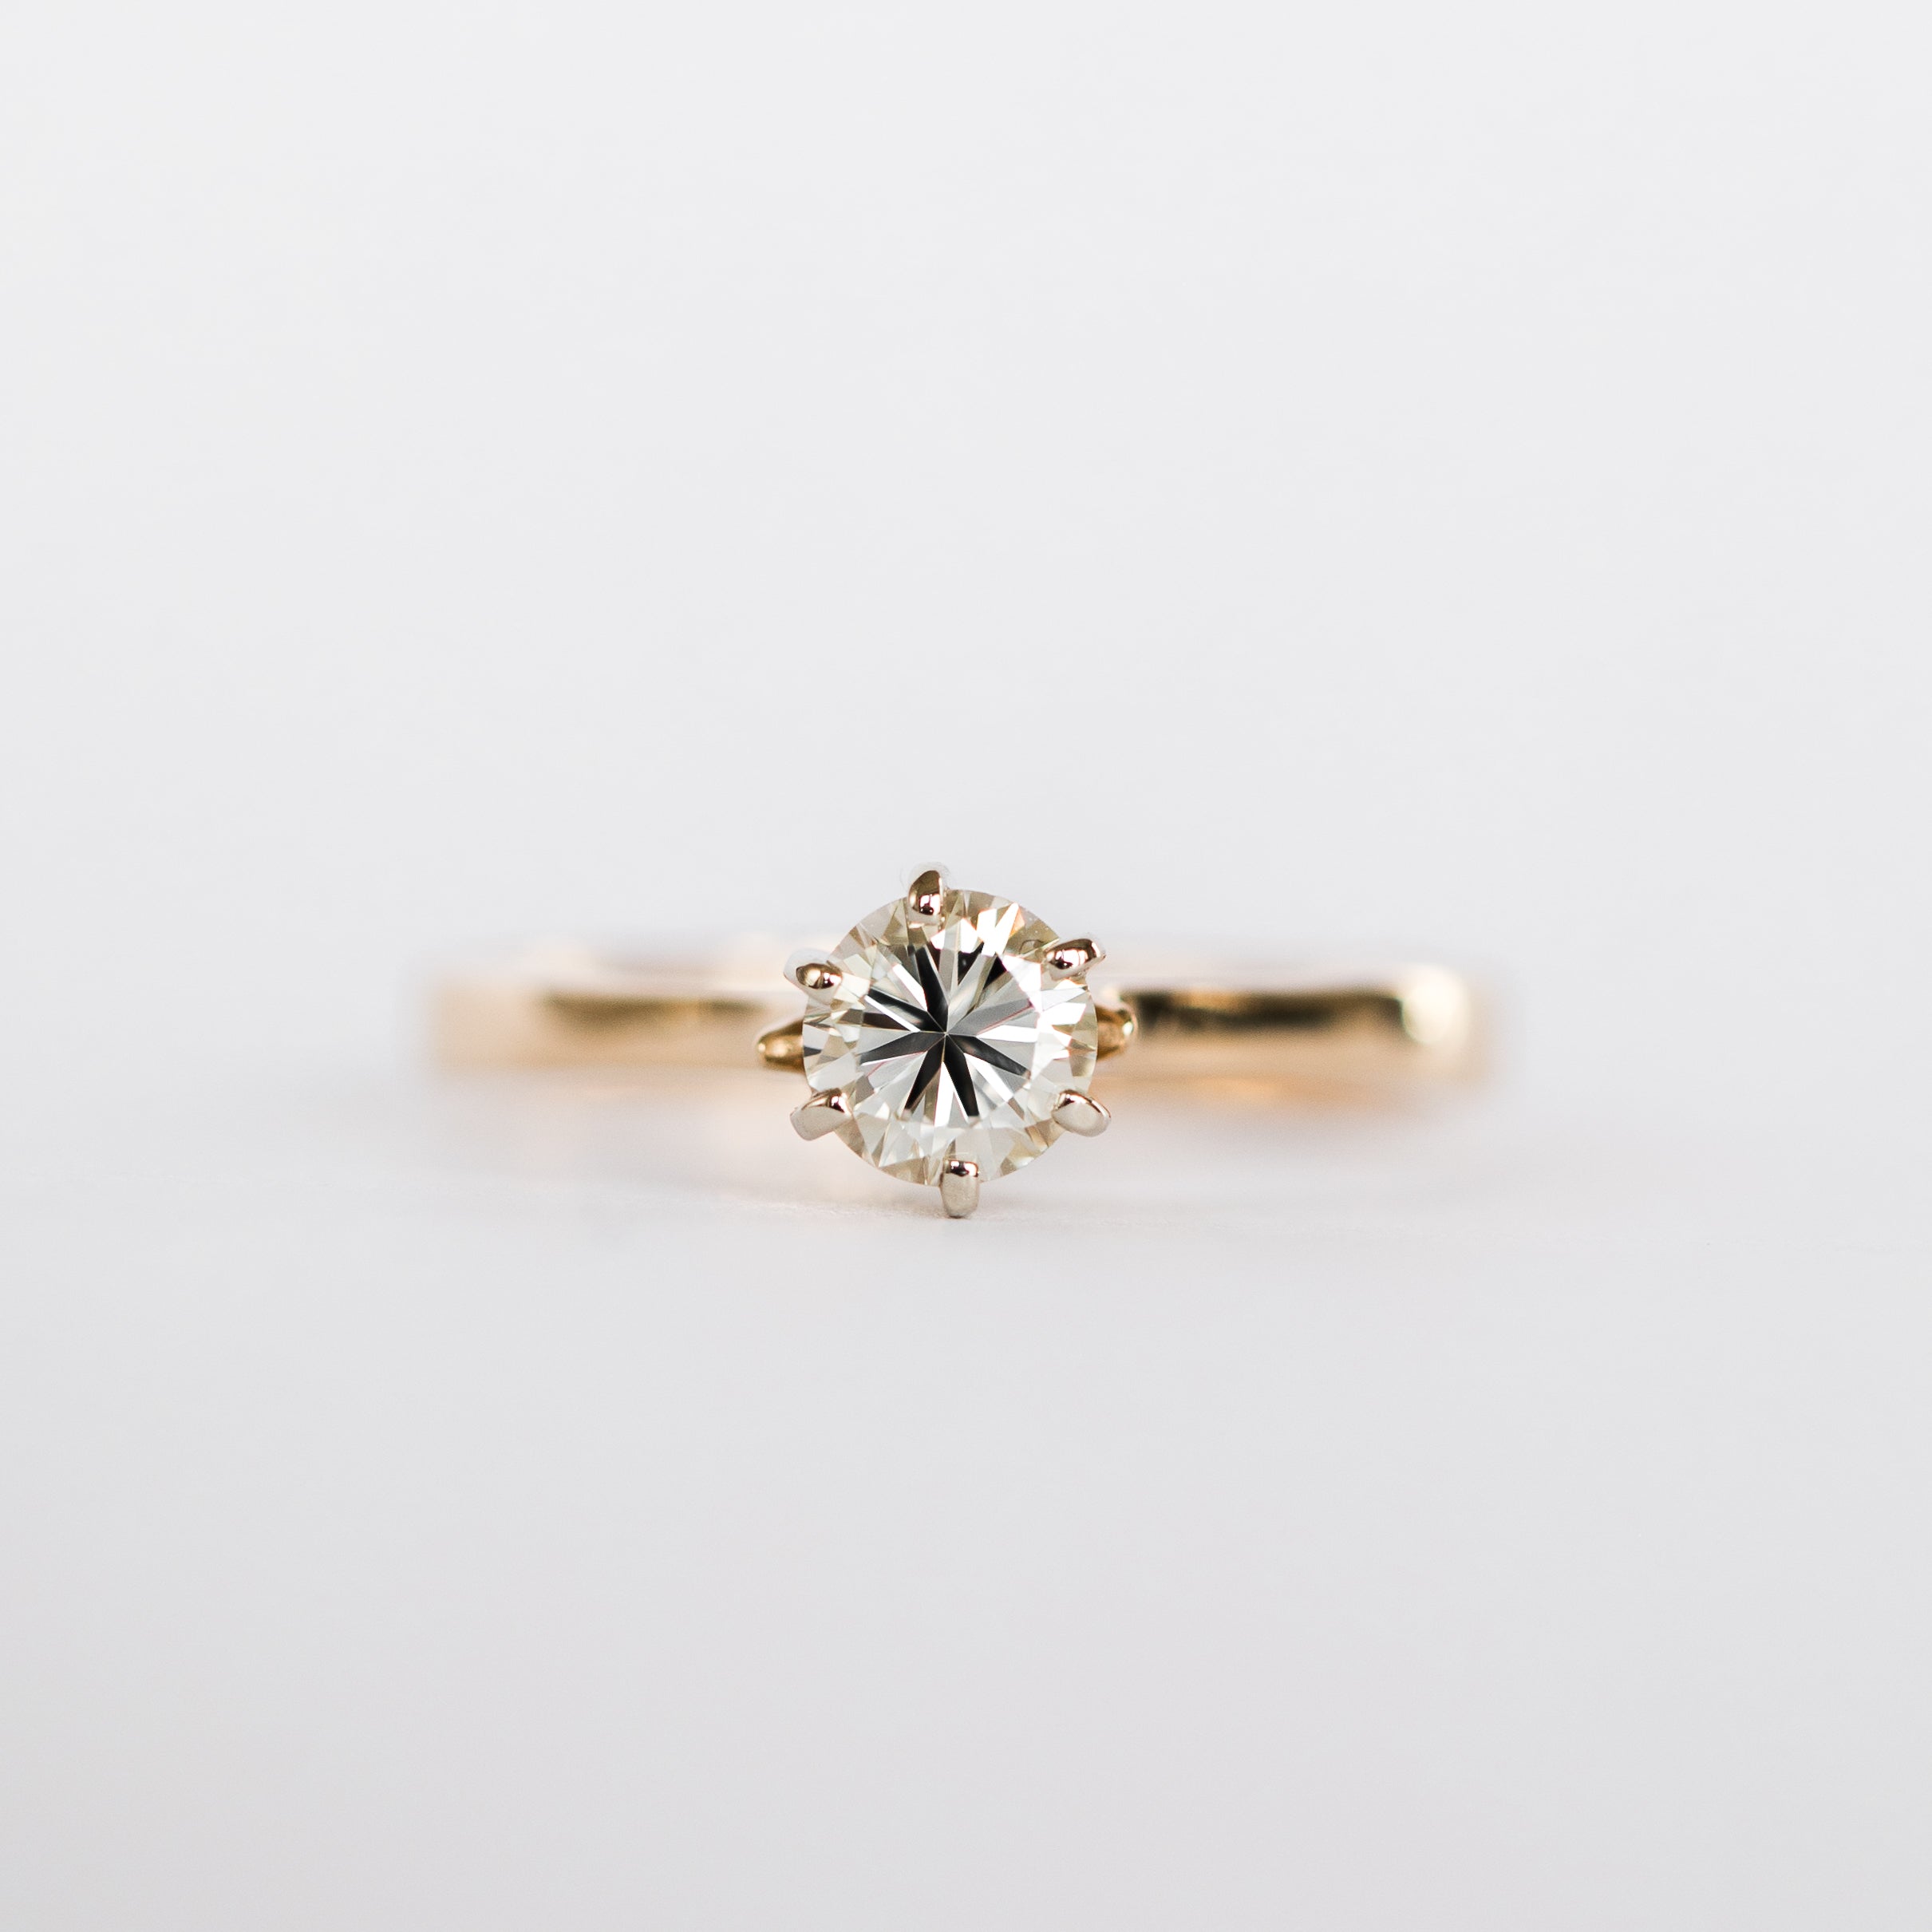 Solitaire Diamond Vintage Ring, Vancouver - The Munro Ring - Evorden